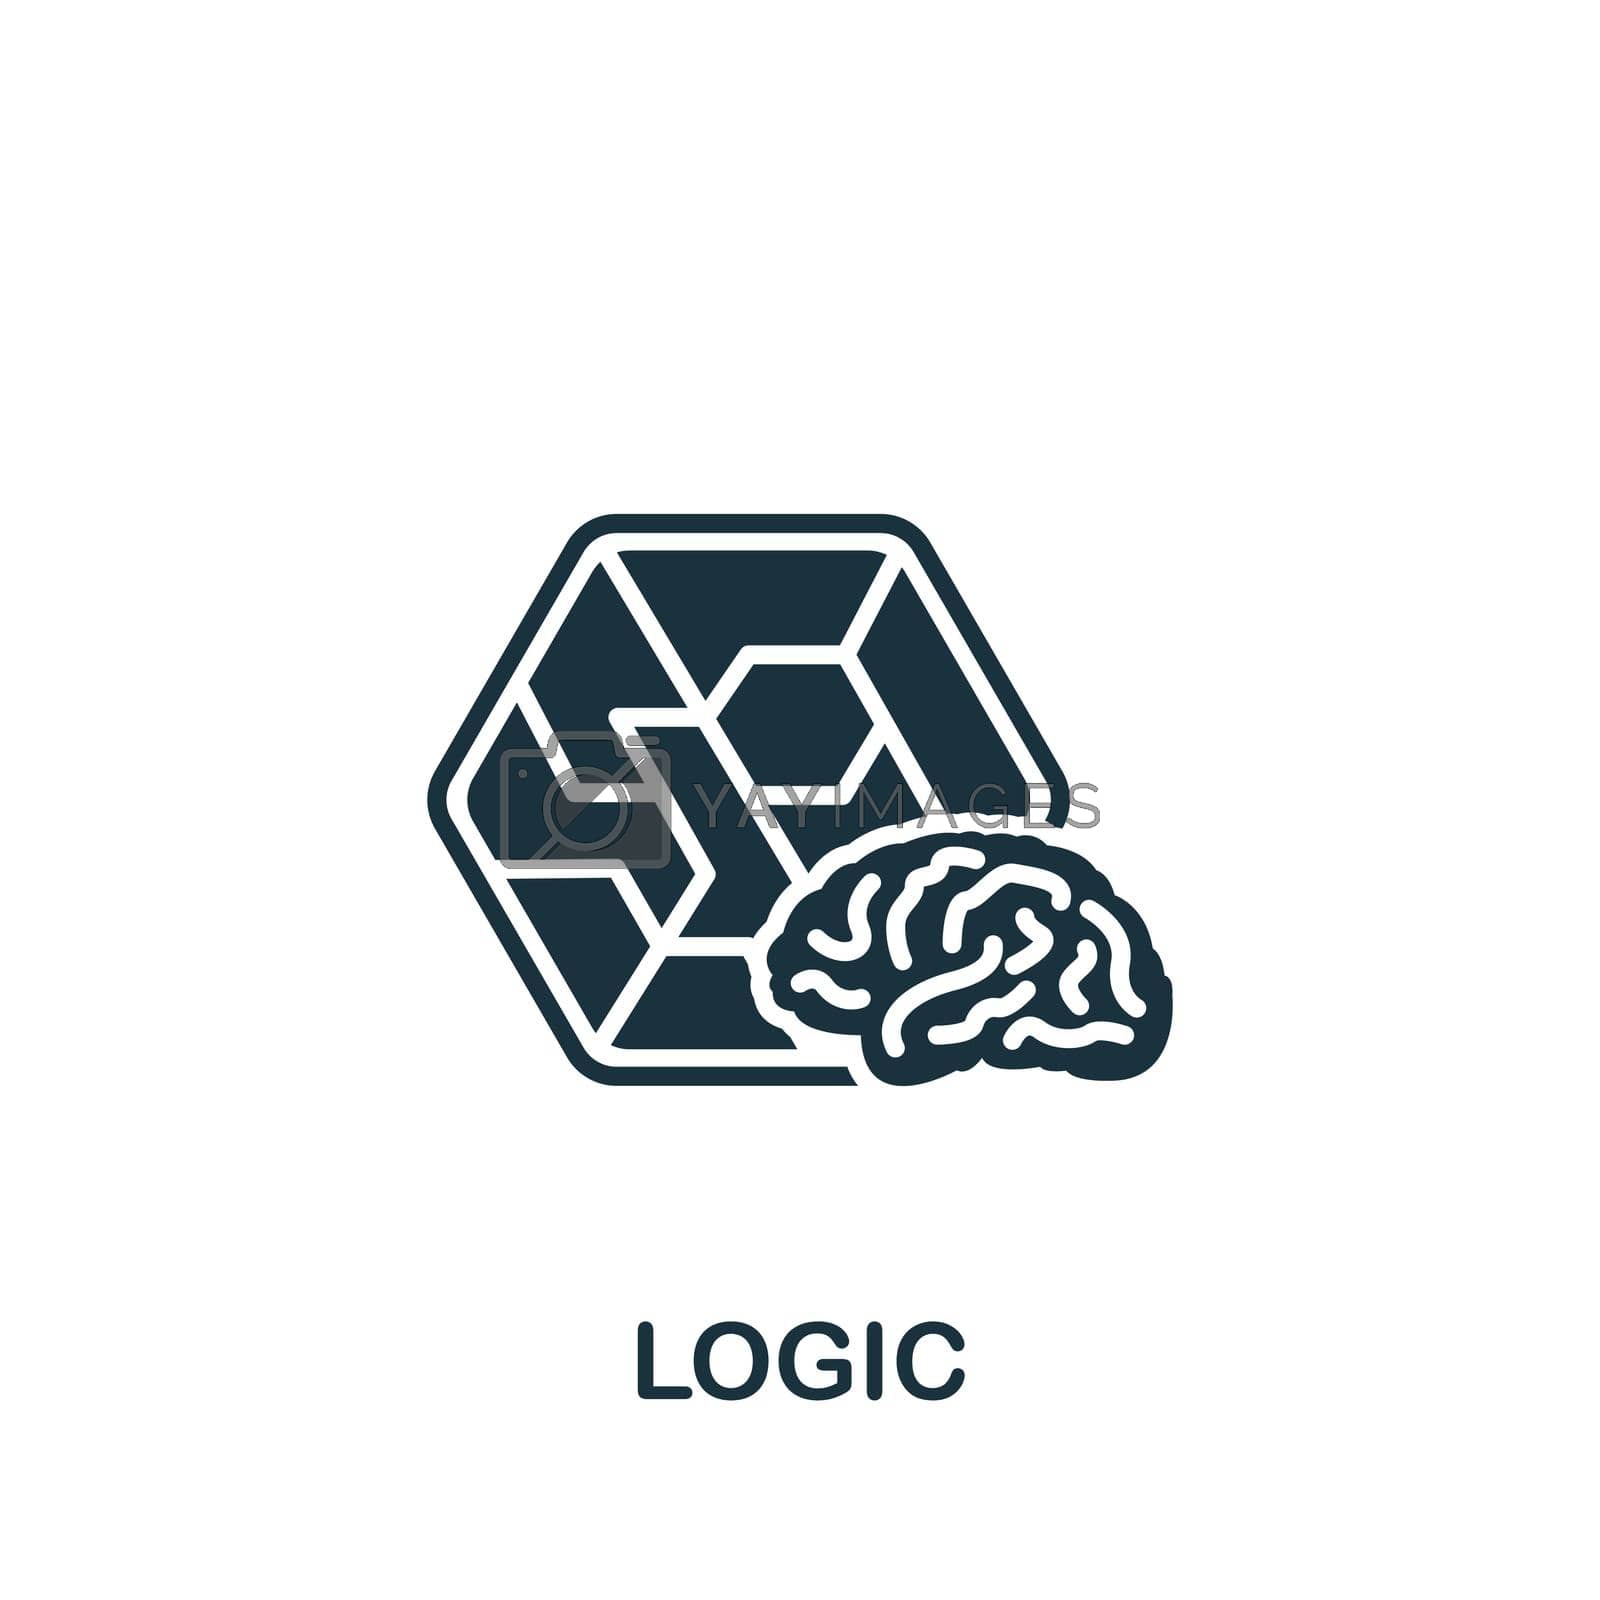 Royalty free image of Logic icon. Monochrome simple icon for templates, web design and infographics by simakovavector